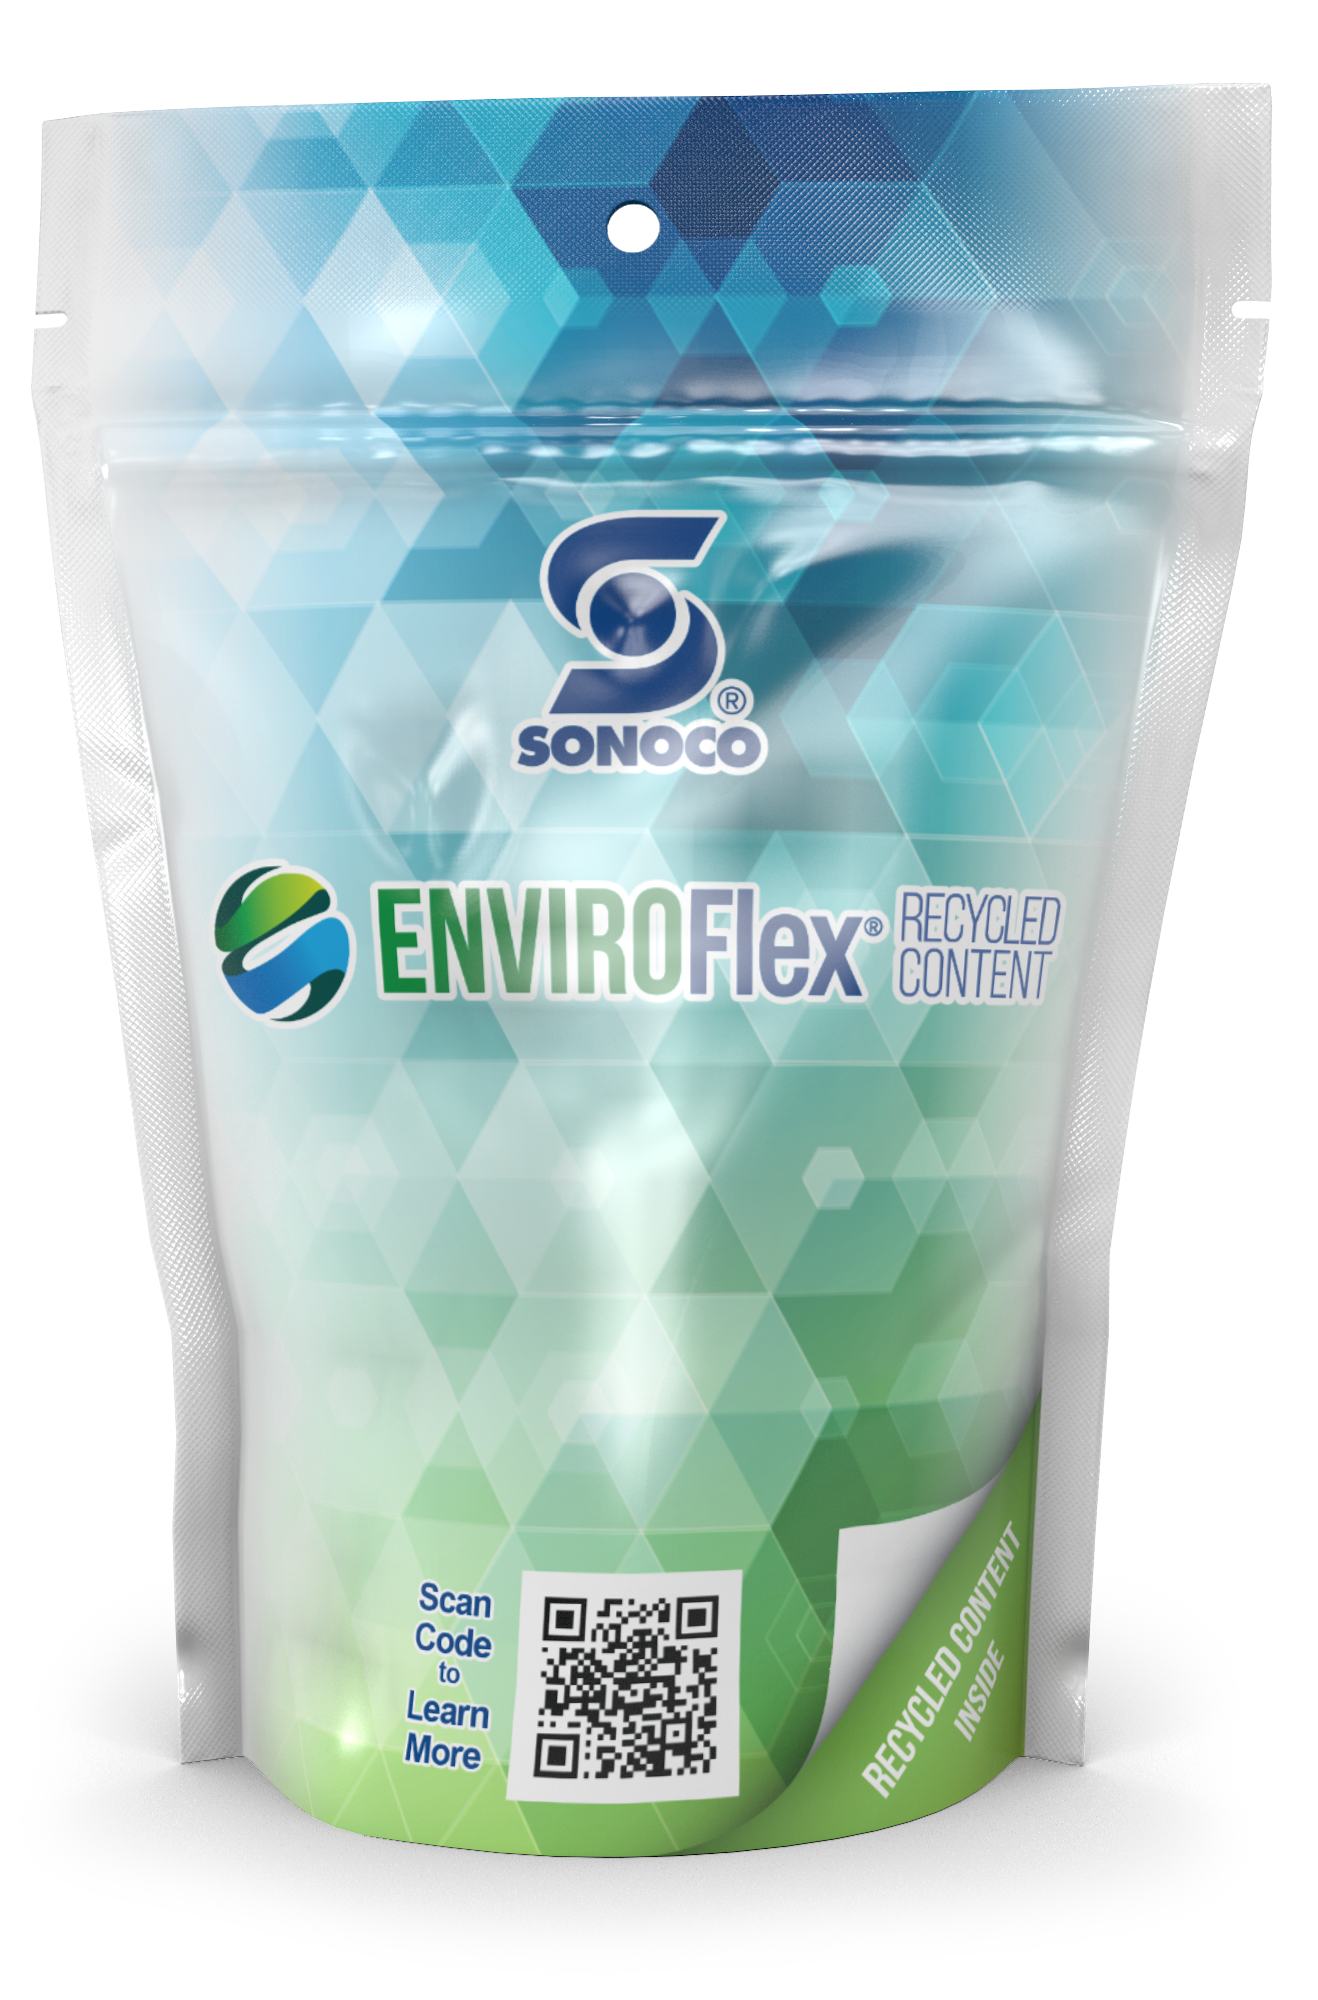 EnviroFlex Recycled Content stand-up pouch